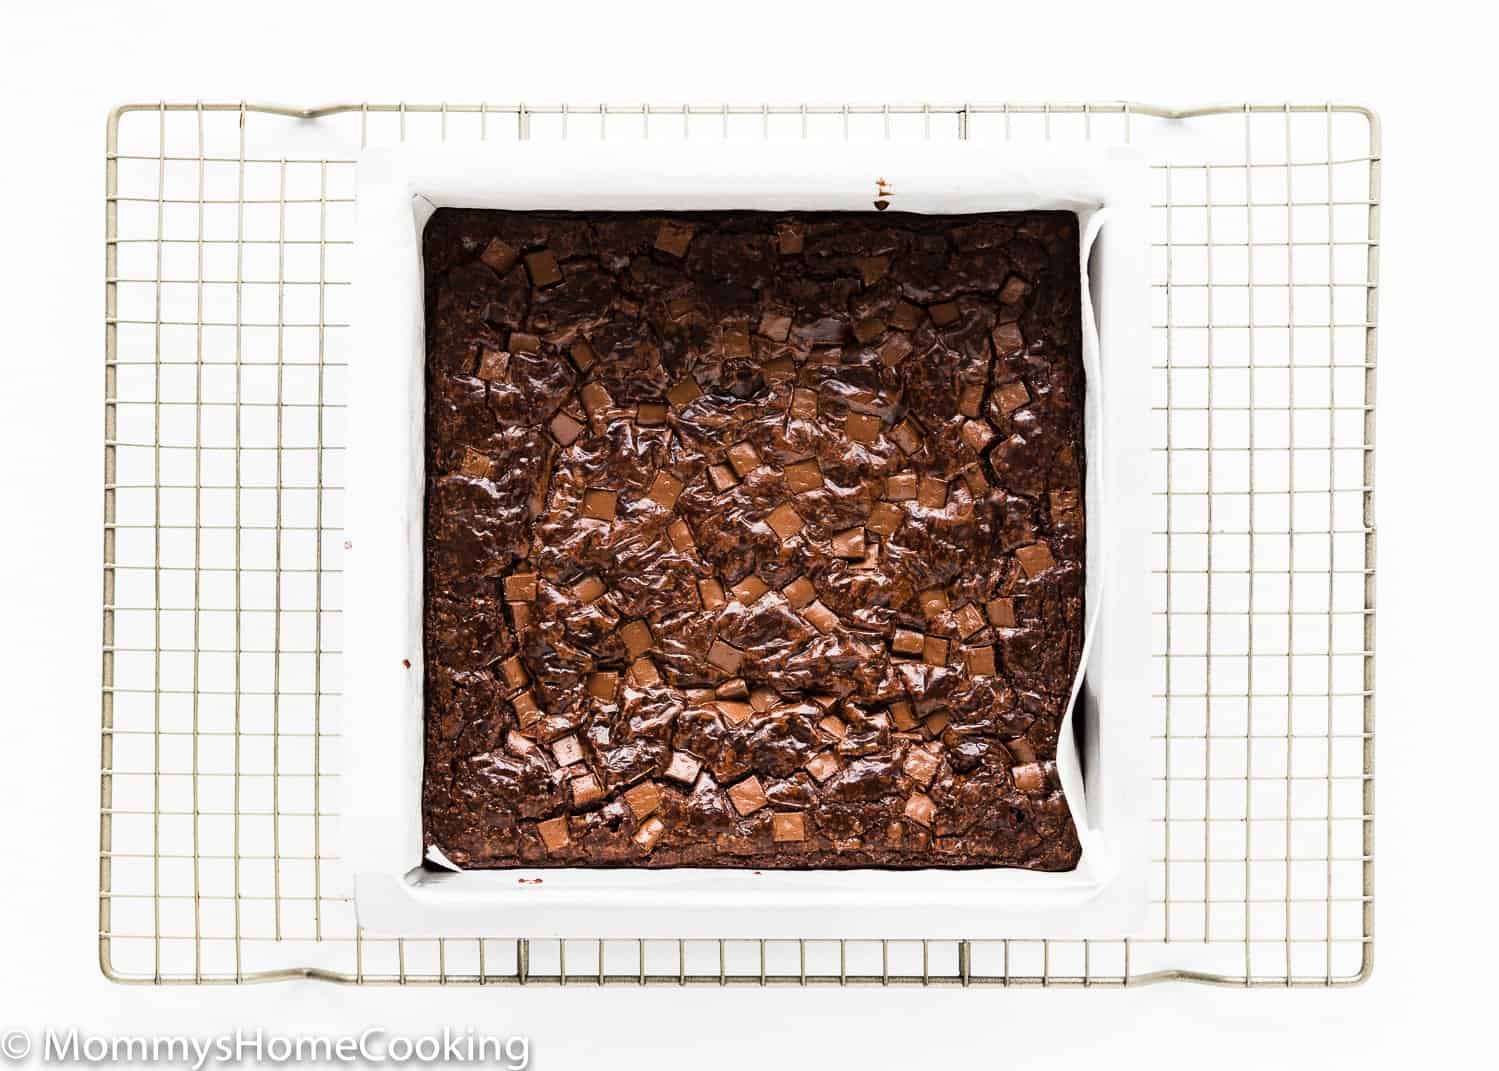 baked egg-free brownies in a square pan over a cooling rack.